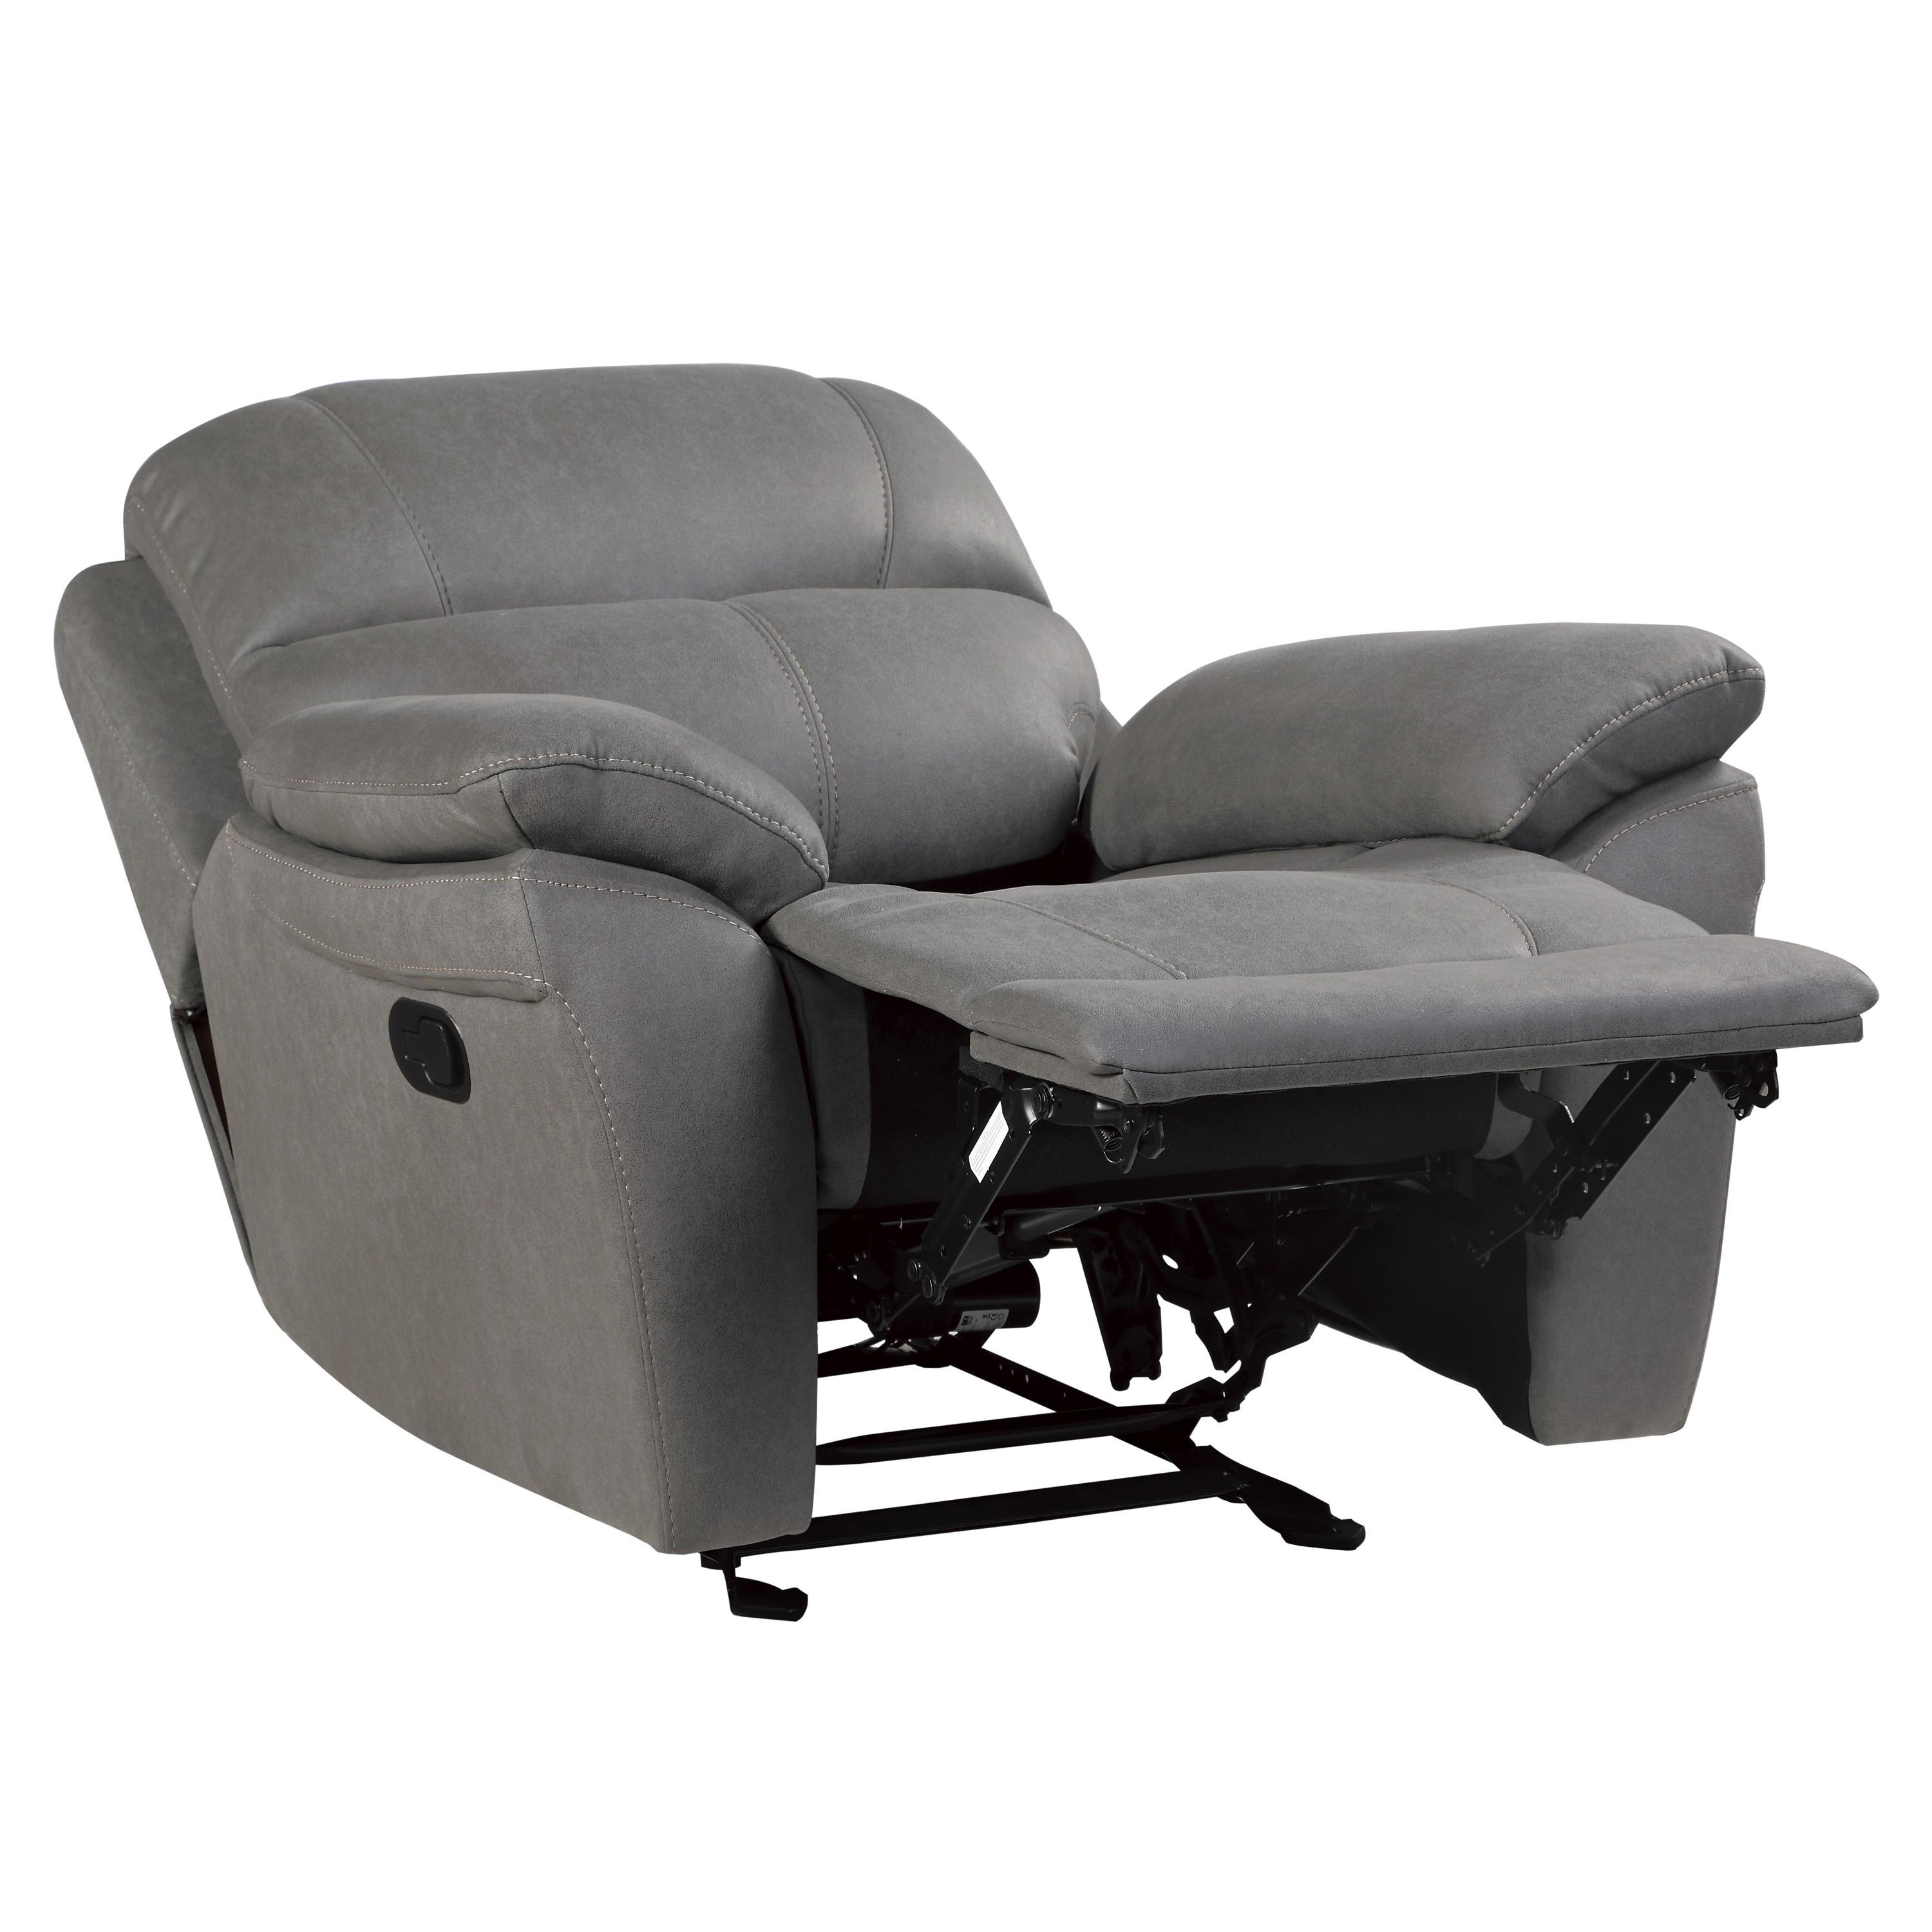 

    
Homelegance 9580GY-1 Longvale Reclining Chair Gray 9580GY-1
